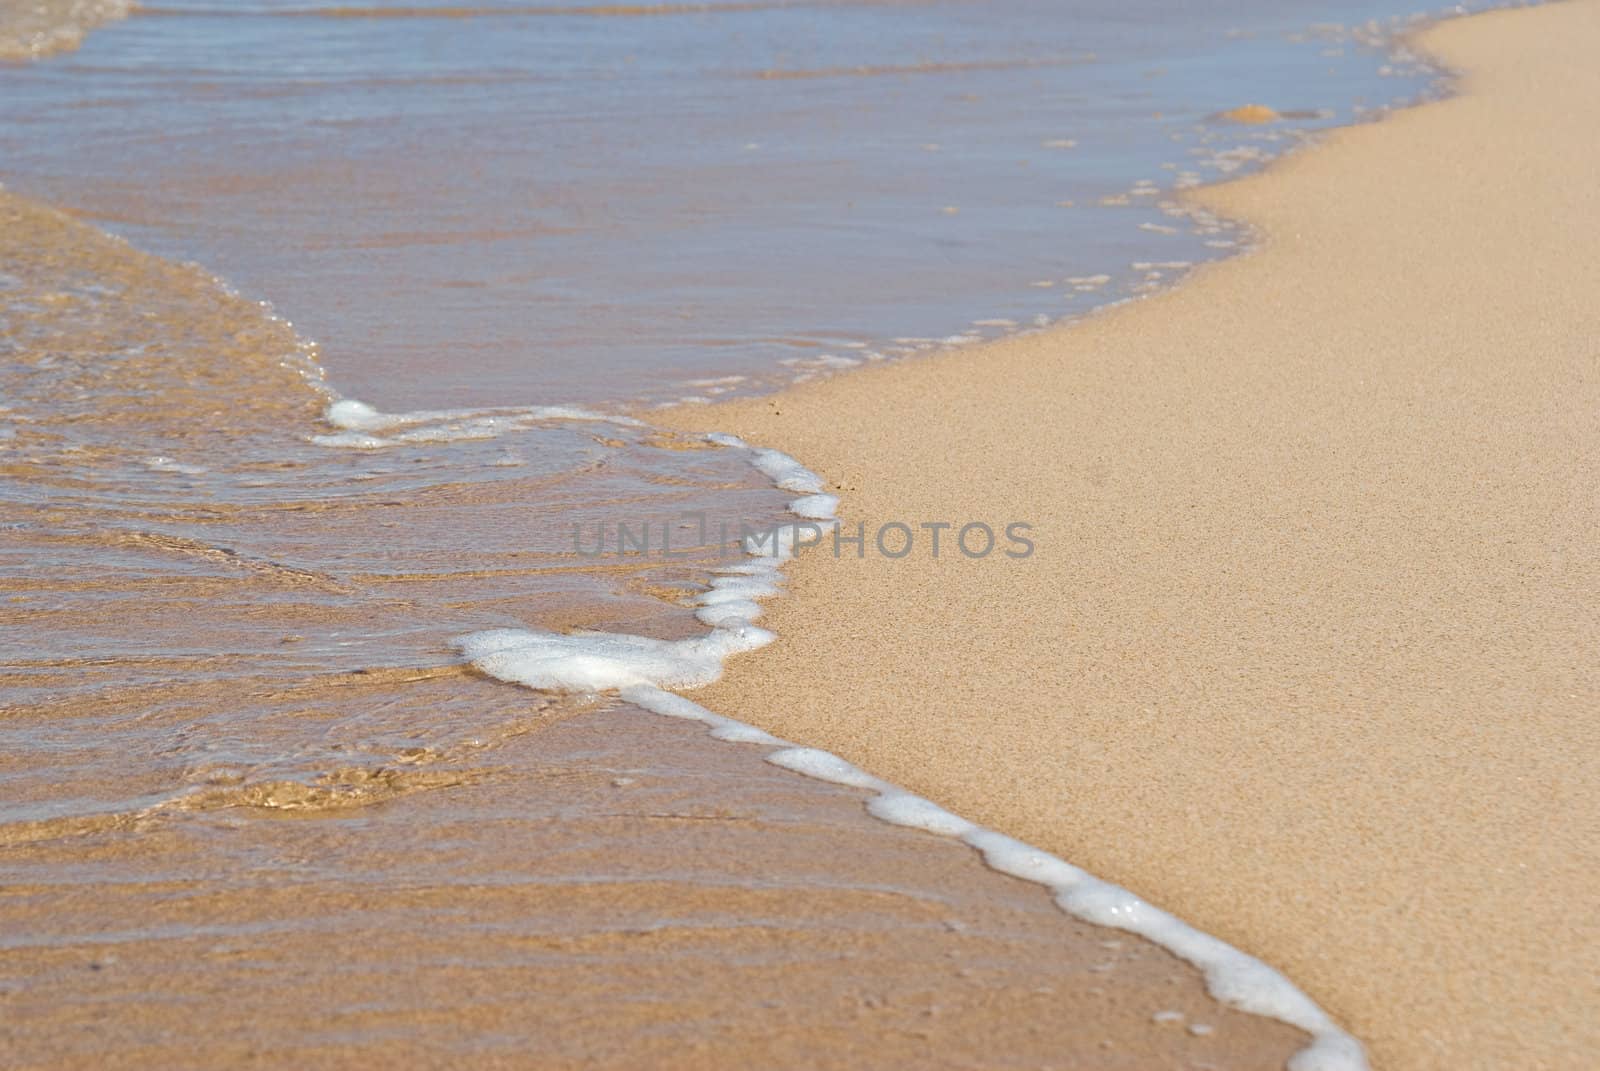 great image of a gentle peaceful wave on the beach